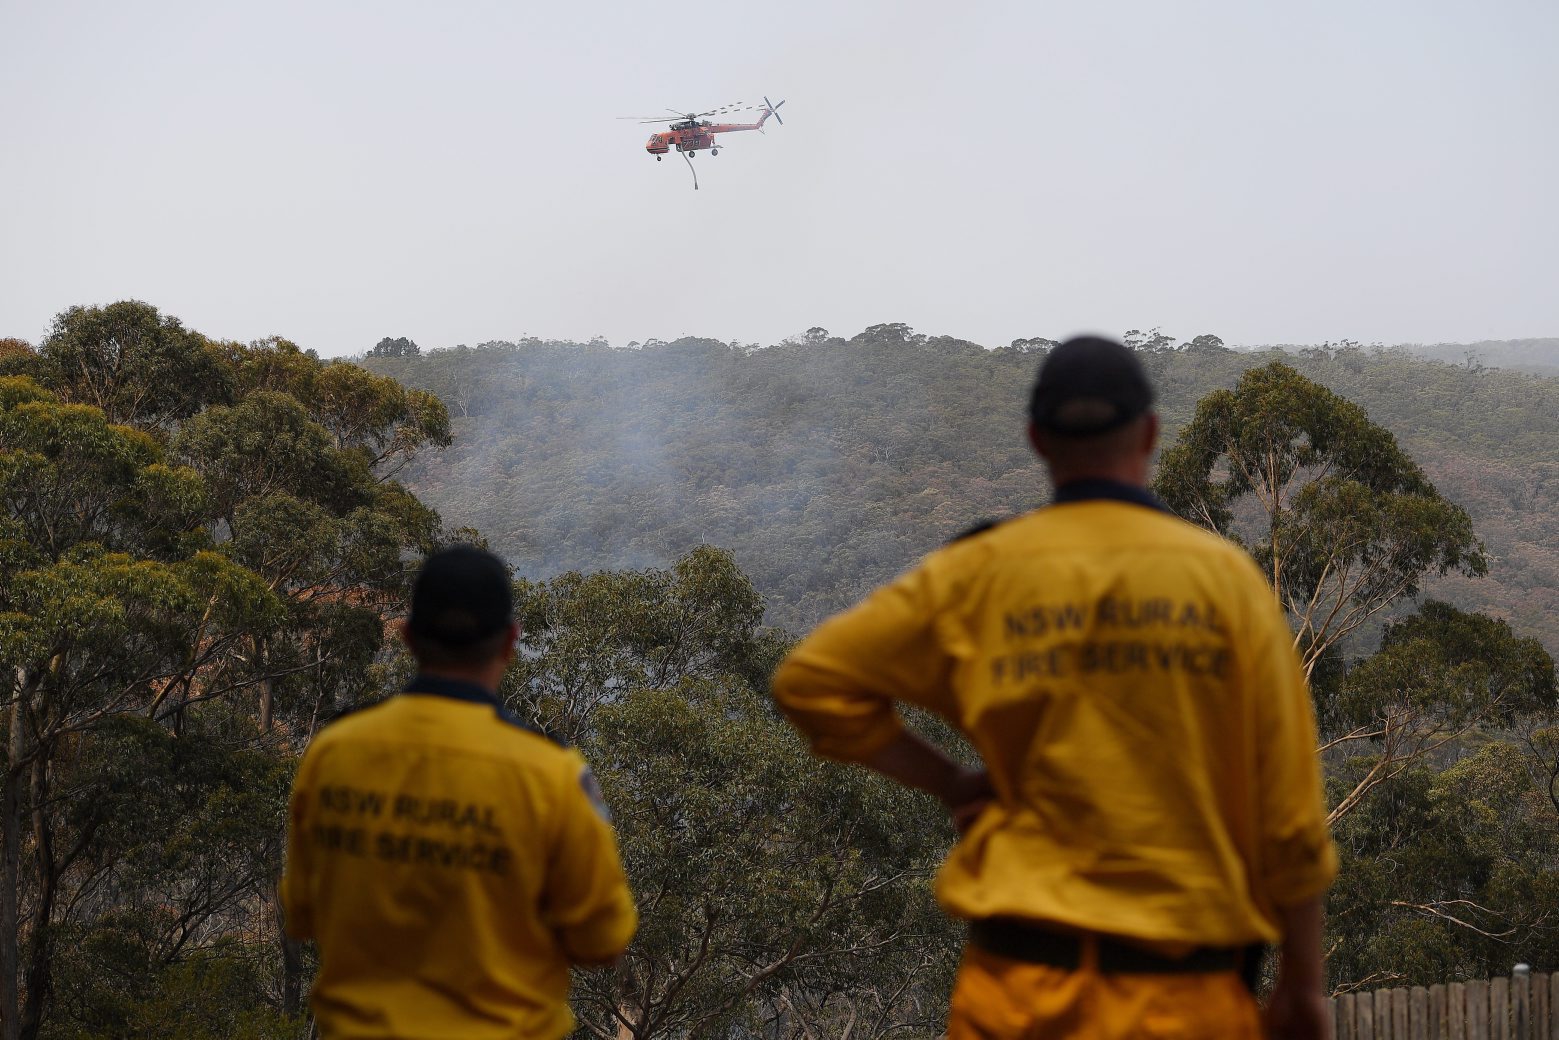 epa08115790 New South Wales Rural Fire Service crews watch as water bombing helicopters fight a fire burning in bushland at Penrose, New South Wales, Australia, 10 January 2020. The Rural Fire Service has placed total fire bans on 10 regions across the state.  EPA/DAN HIMBRECHTS AUSTRALIA AND NEW ZEALAND OUT AUSTRALIA BUSHFIRES NEW SOUTH WALES